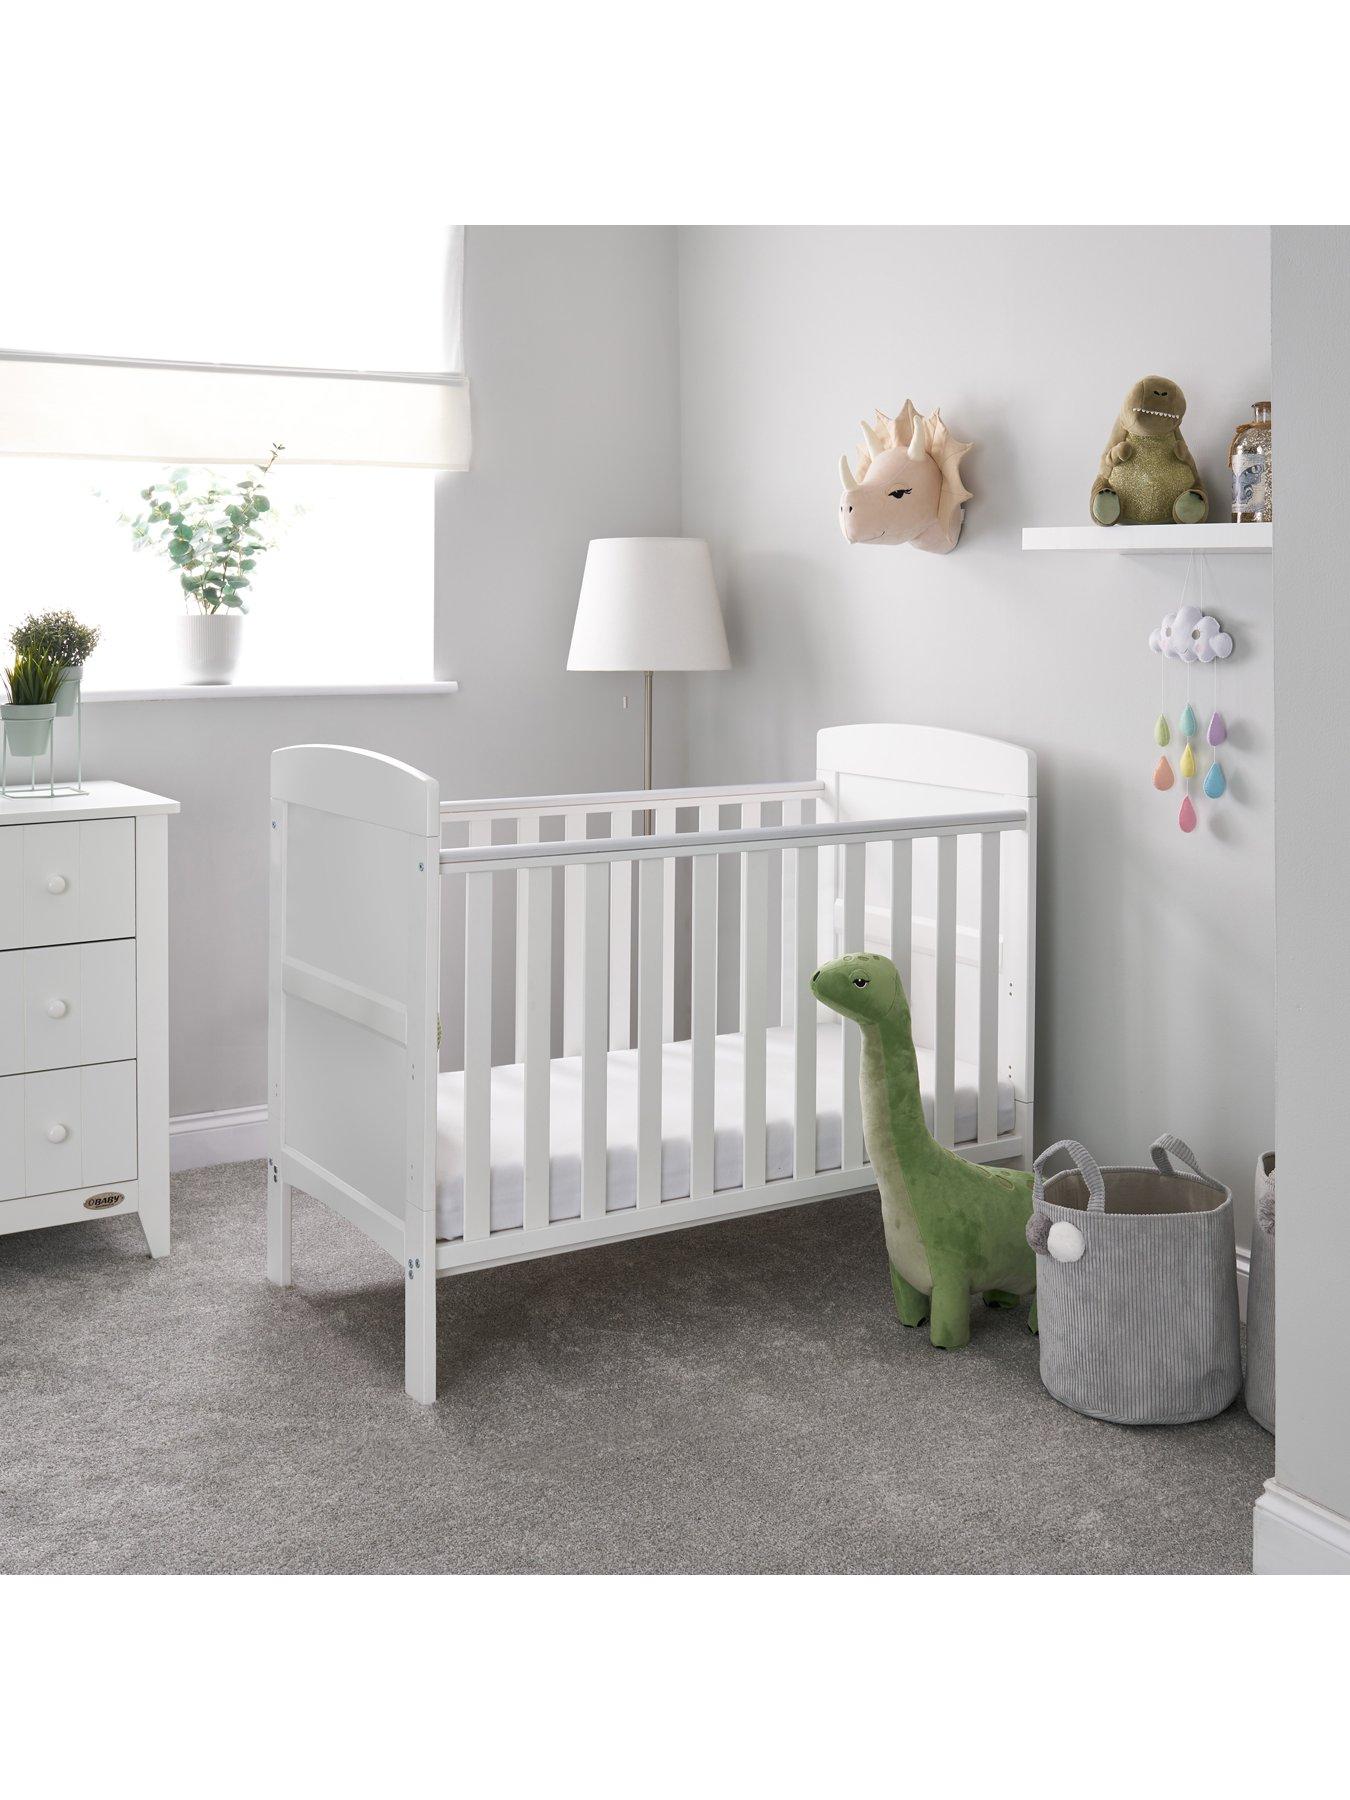 Obaby | Cots & | beds & | Very Child Nursery furniture cot Ireland baby 